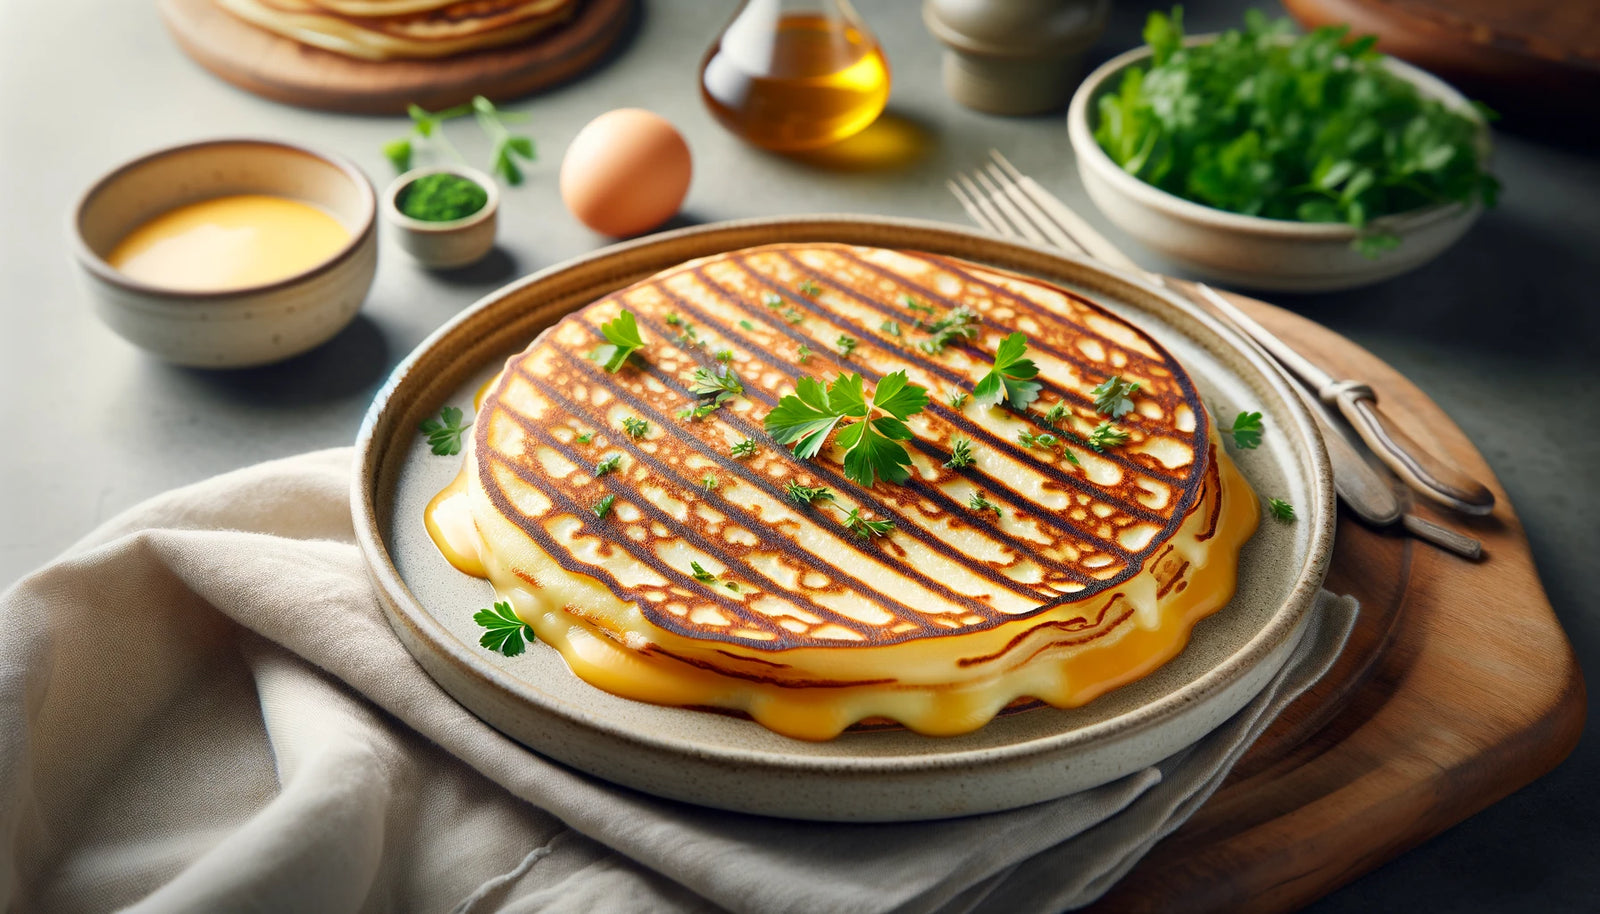 Perfect Grilled Cheese Crepes on the Arteflame Grill